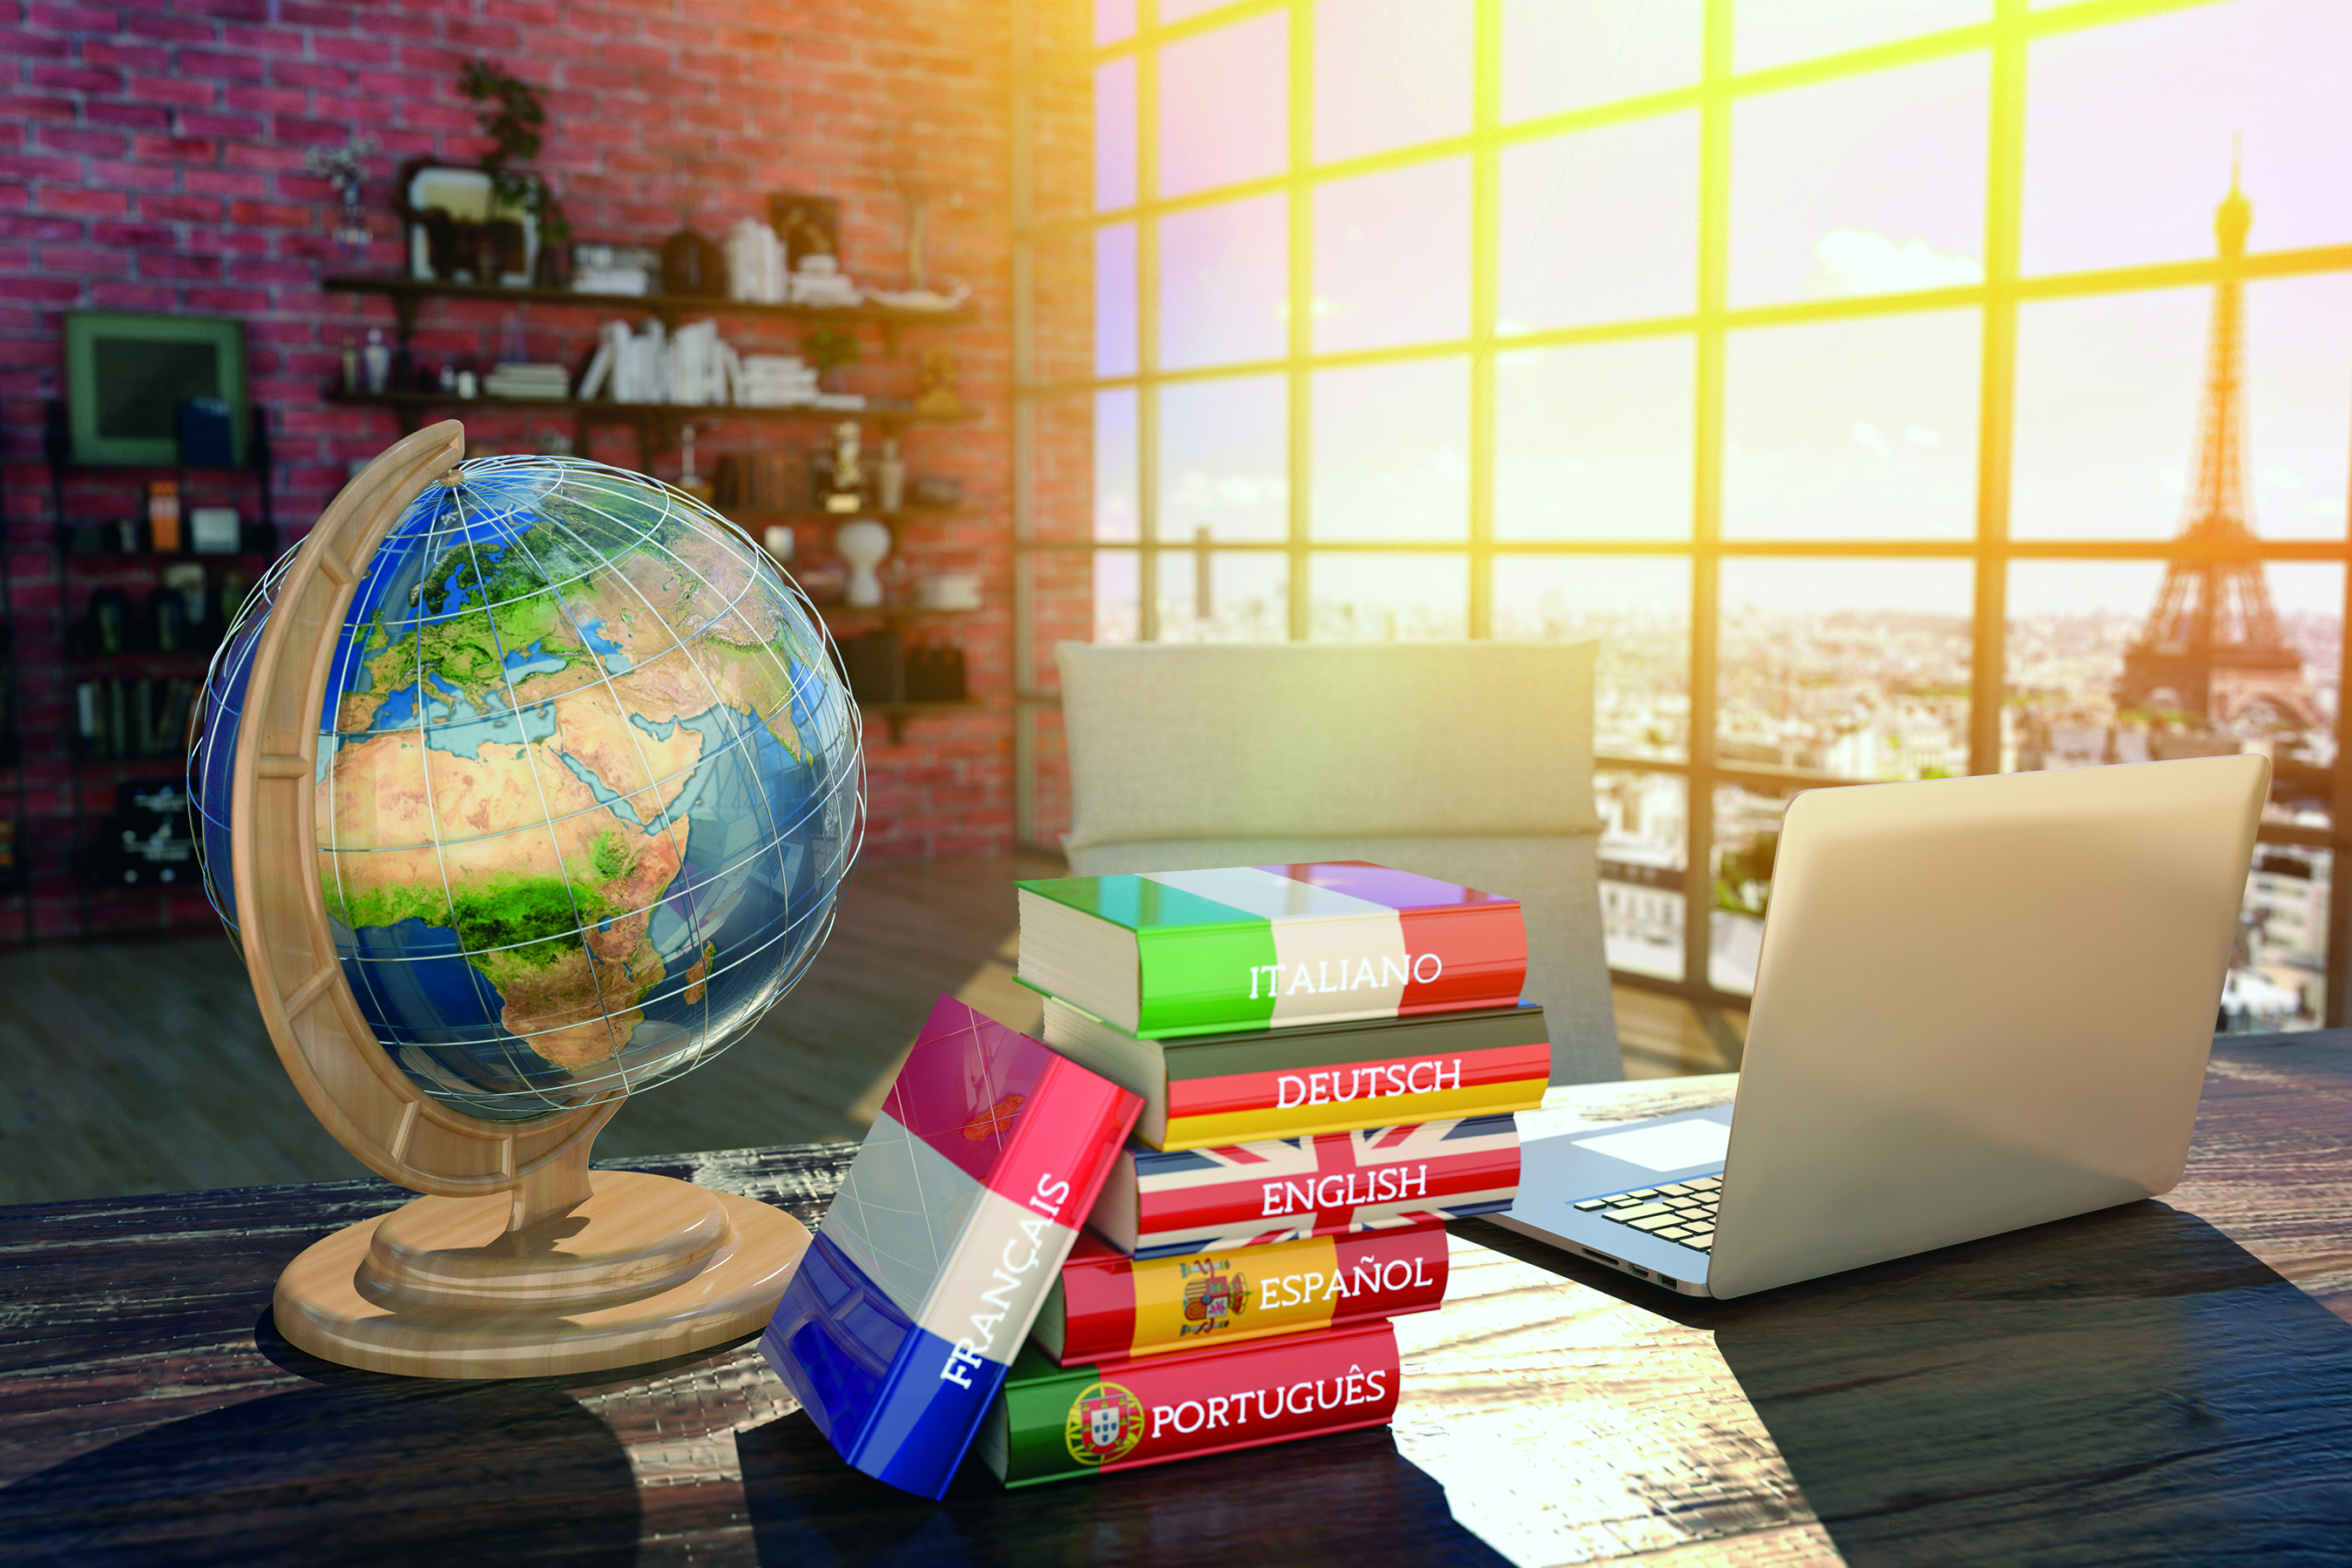 A globe and dictionaries on a desk. A huge window in the background letting in sunlight.